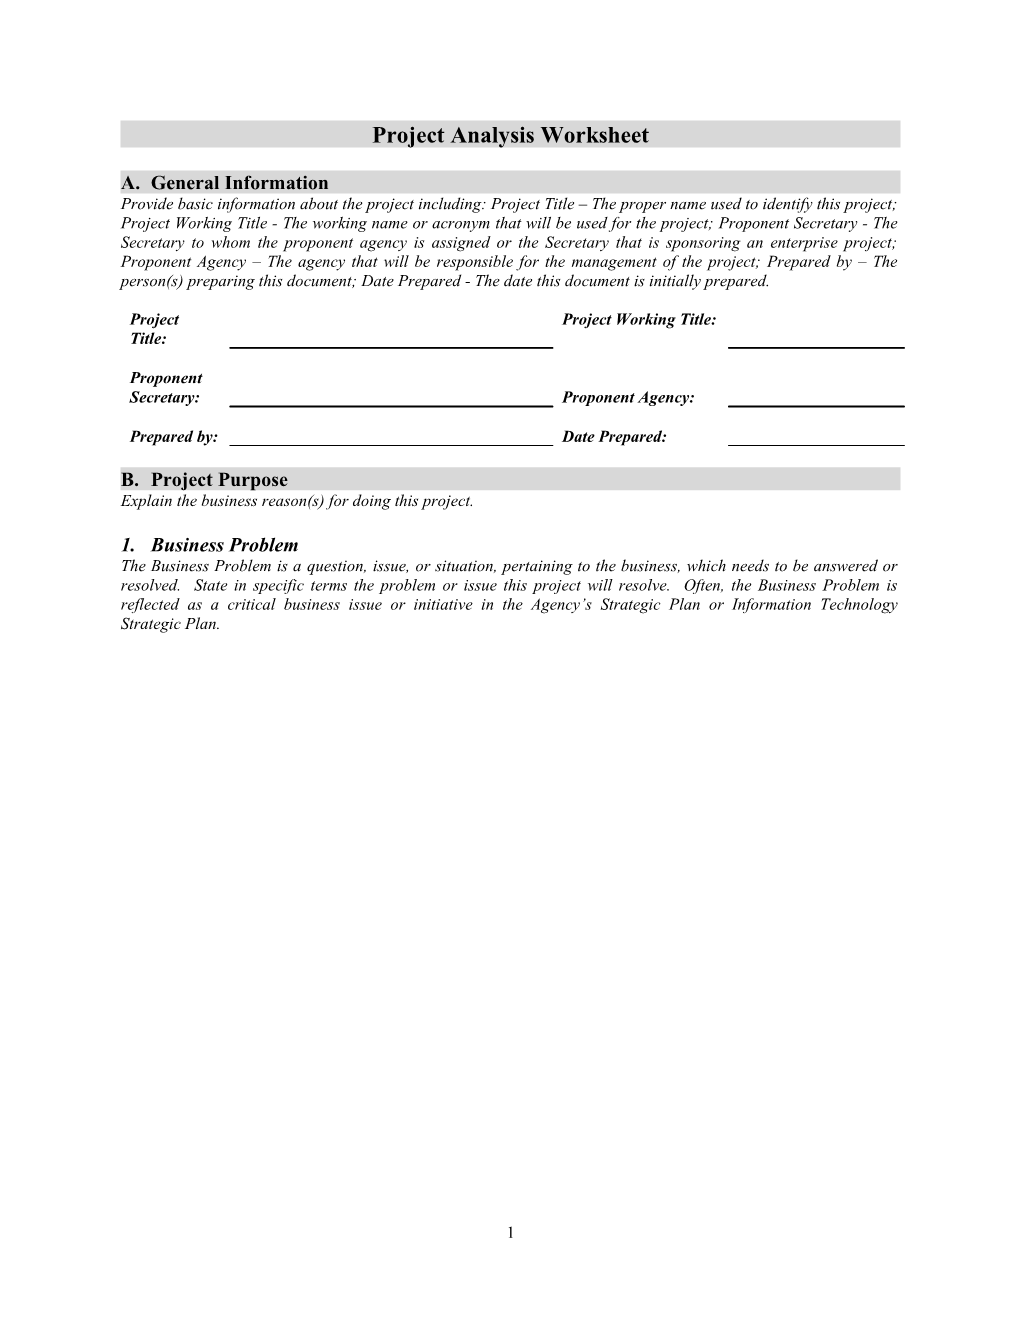 Project Analysis Worksheet